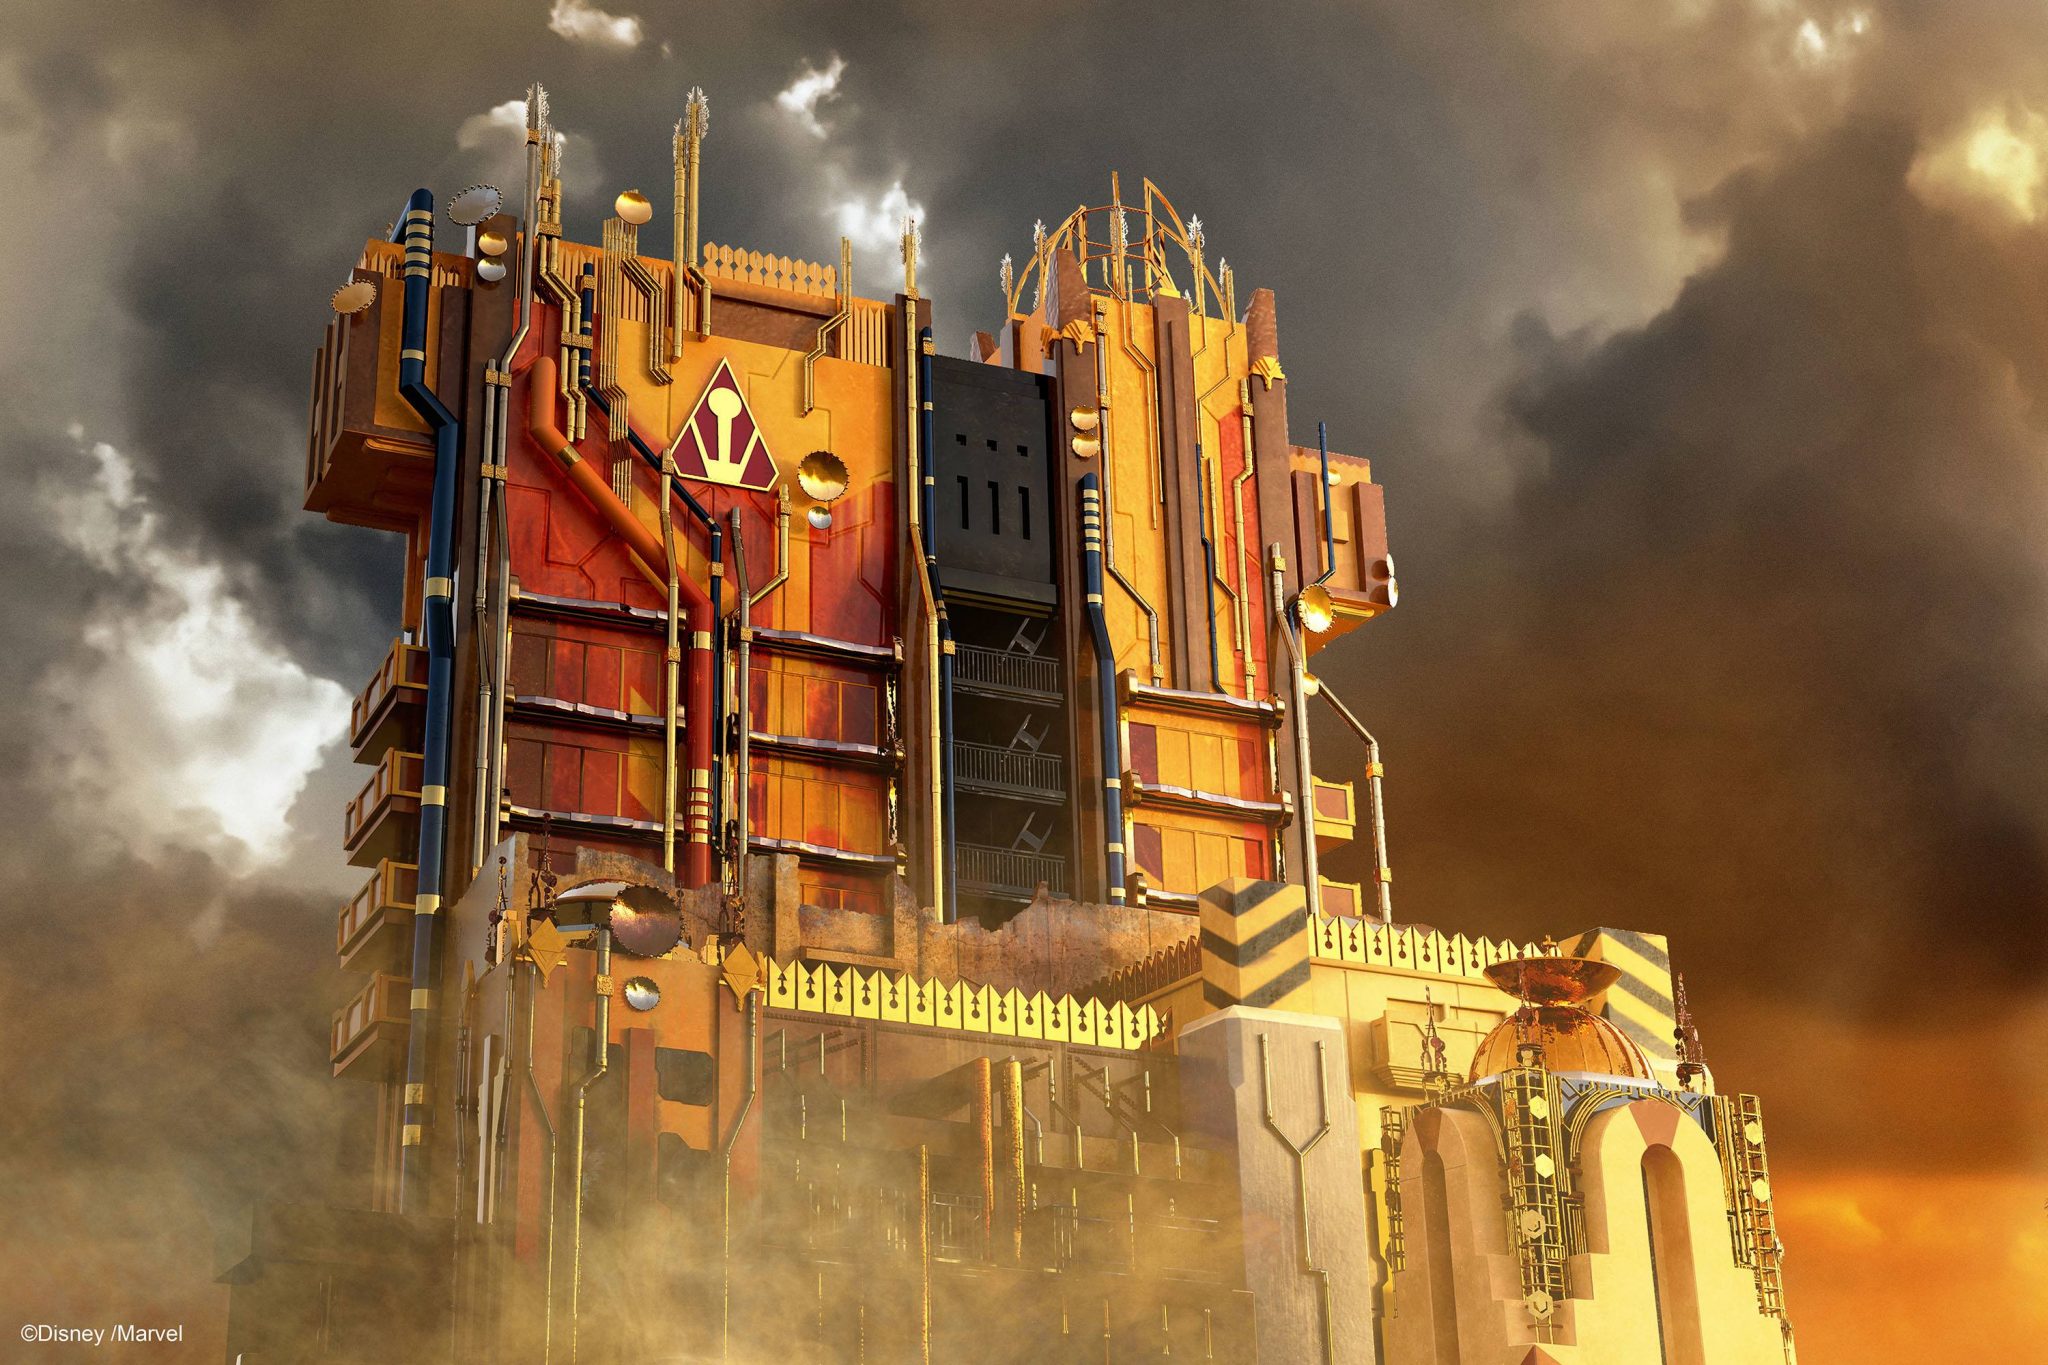 Disneyland Resort Debuts a New Universe of Fun This Summer with Guardians of the Galaxy – Mission: BREAKOUT!